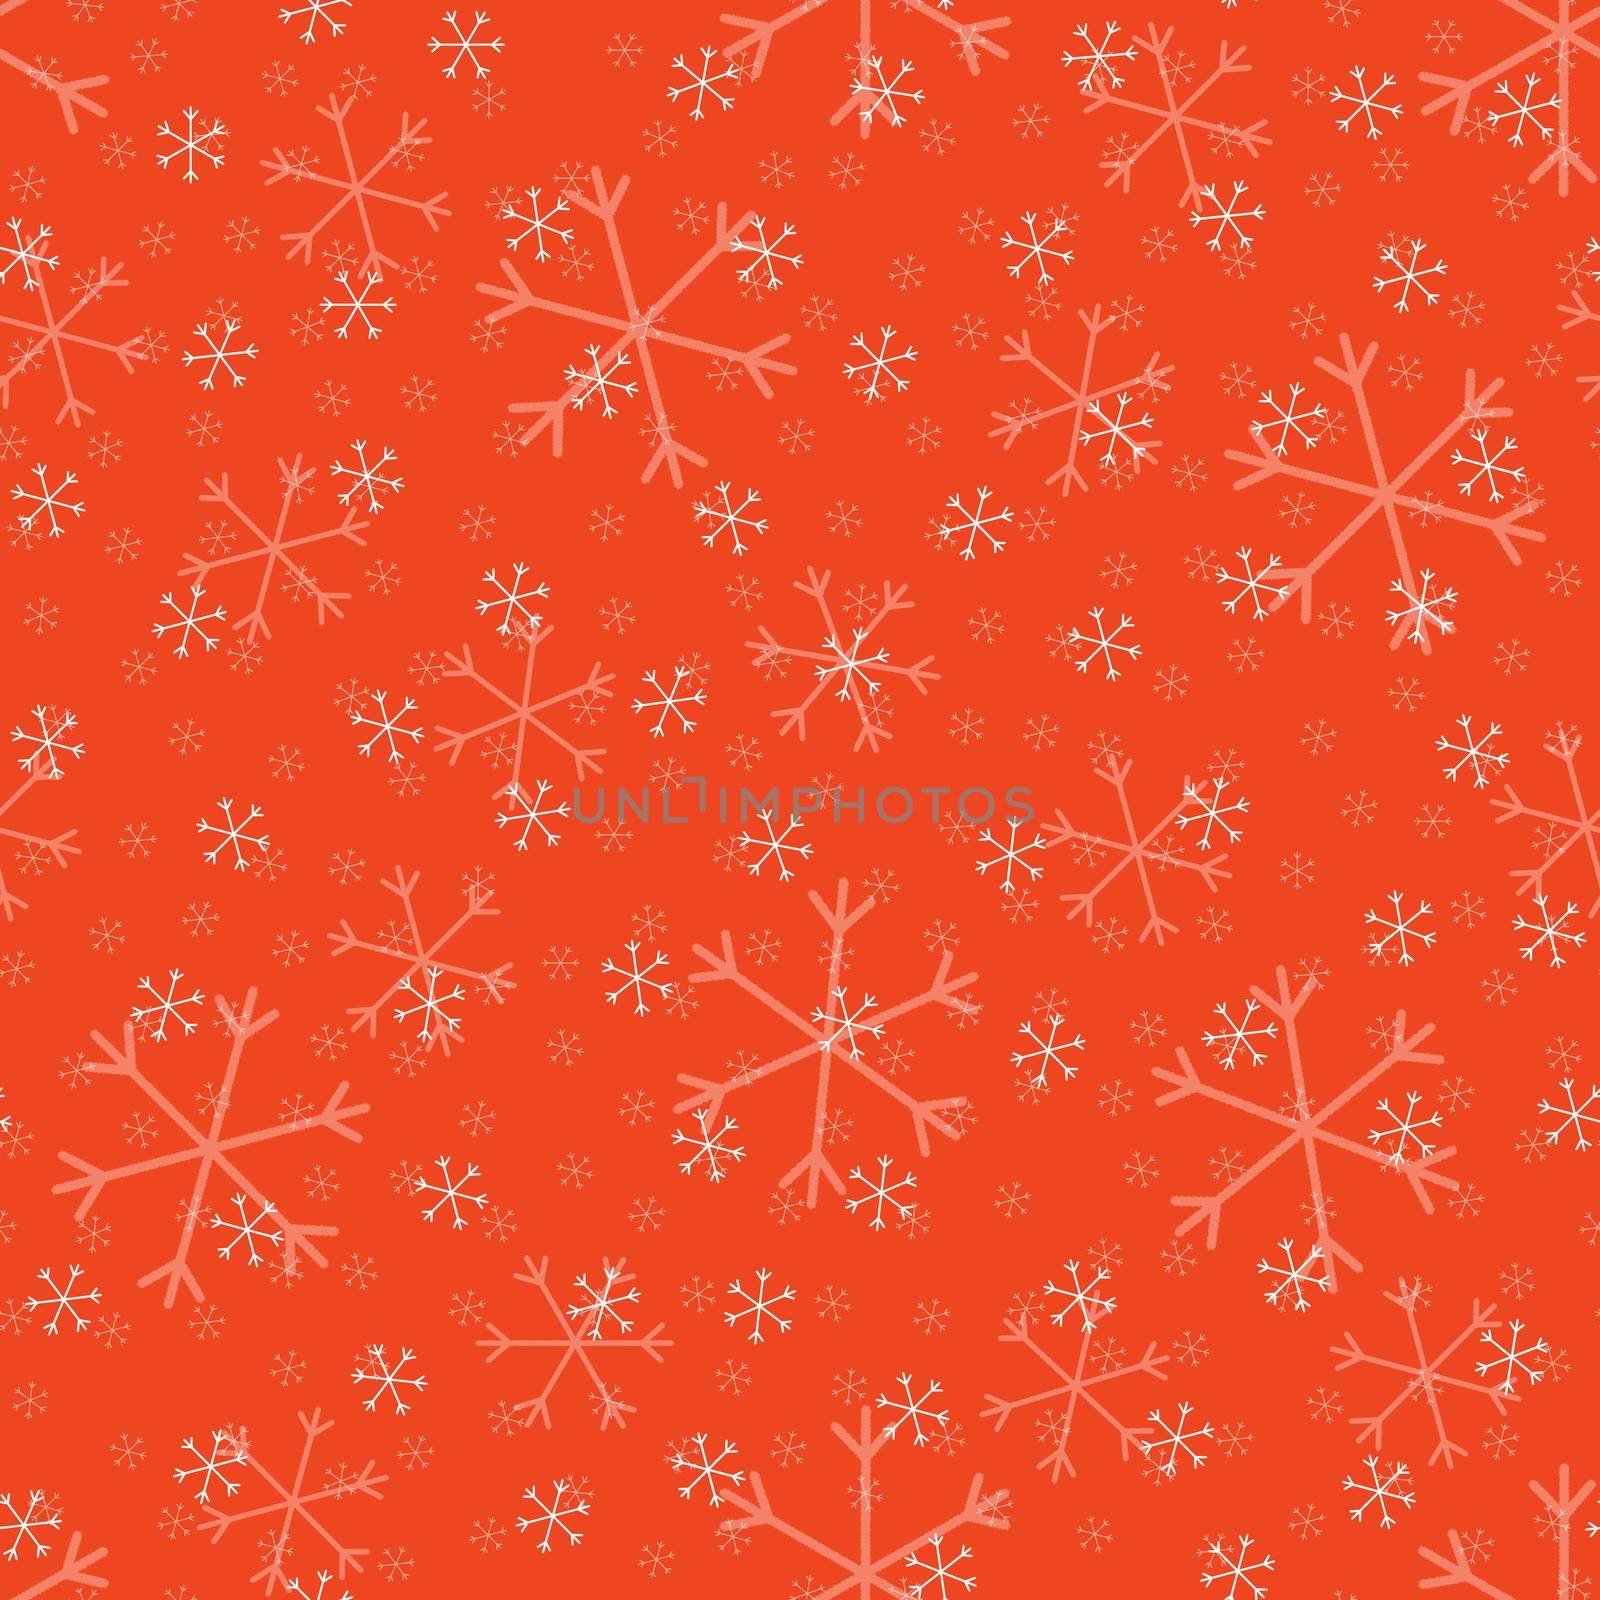 Seamless Christmas pattern doodle with hand random drawn snowflakes.Wrapping paper for presents, funny textile fabric print, design, decor, food wrap, backgrounds. new year.Raster copy.Coral, pink